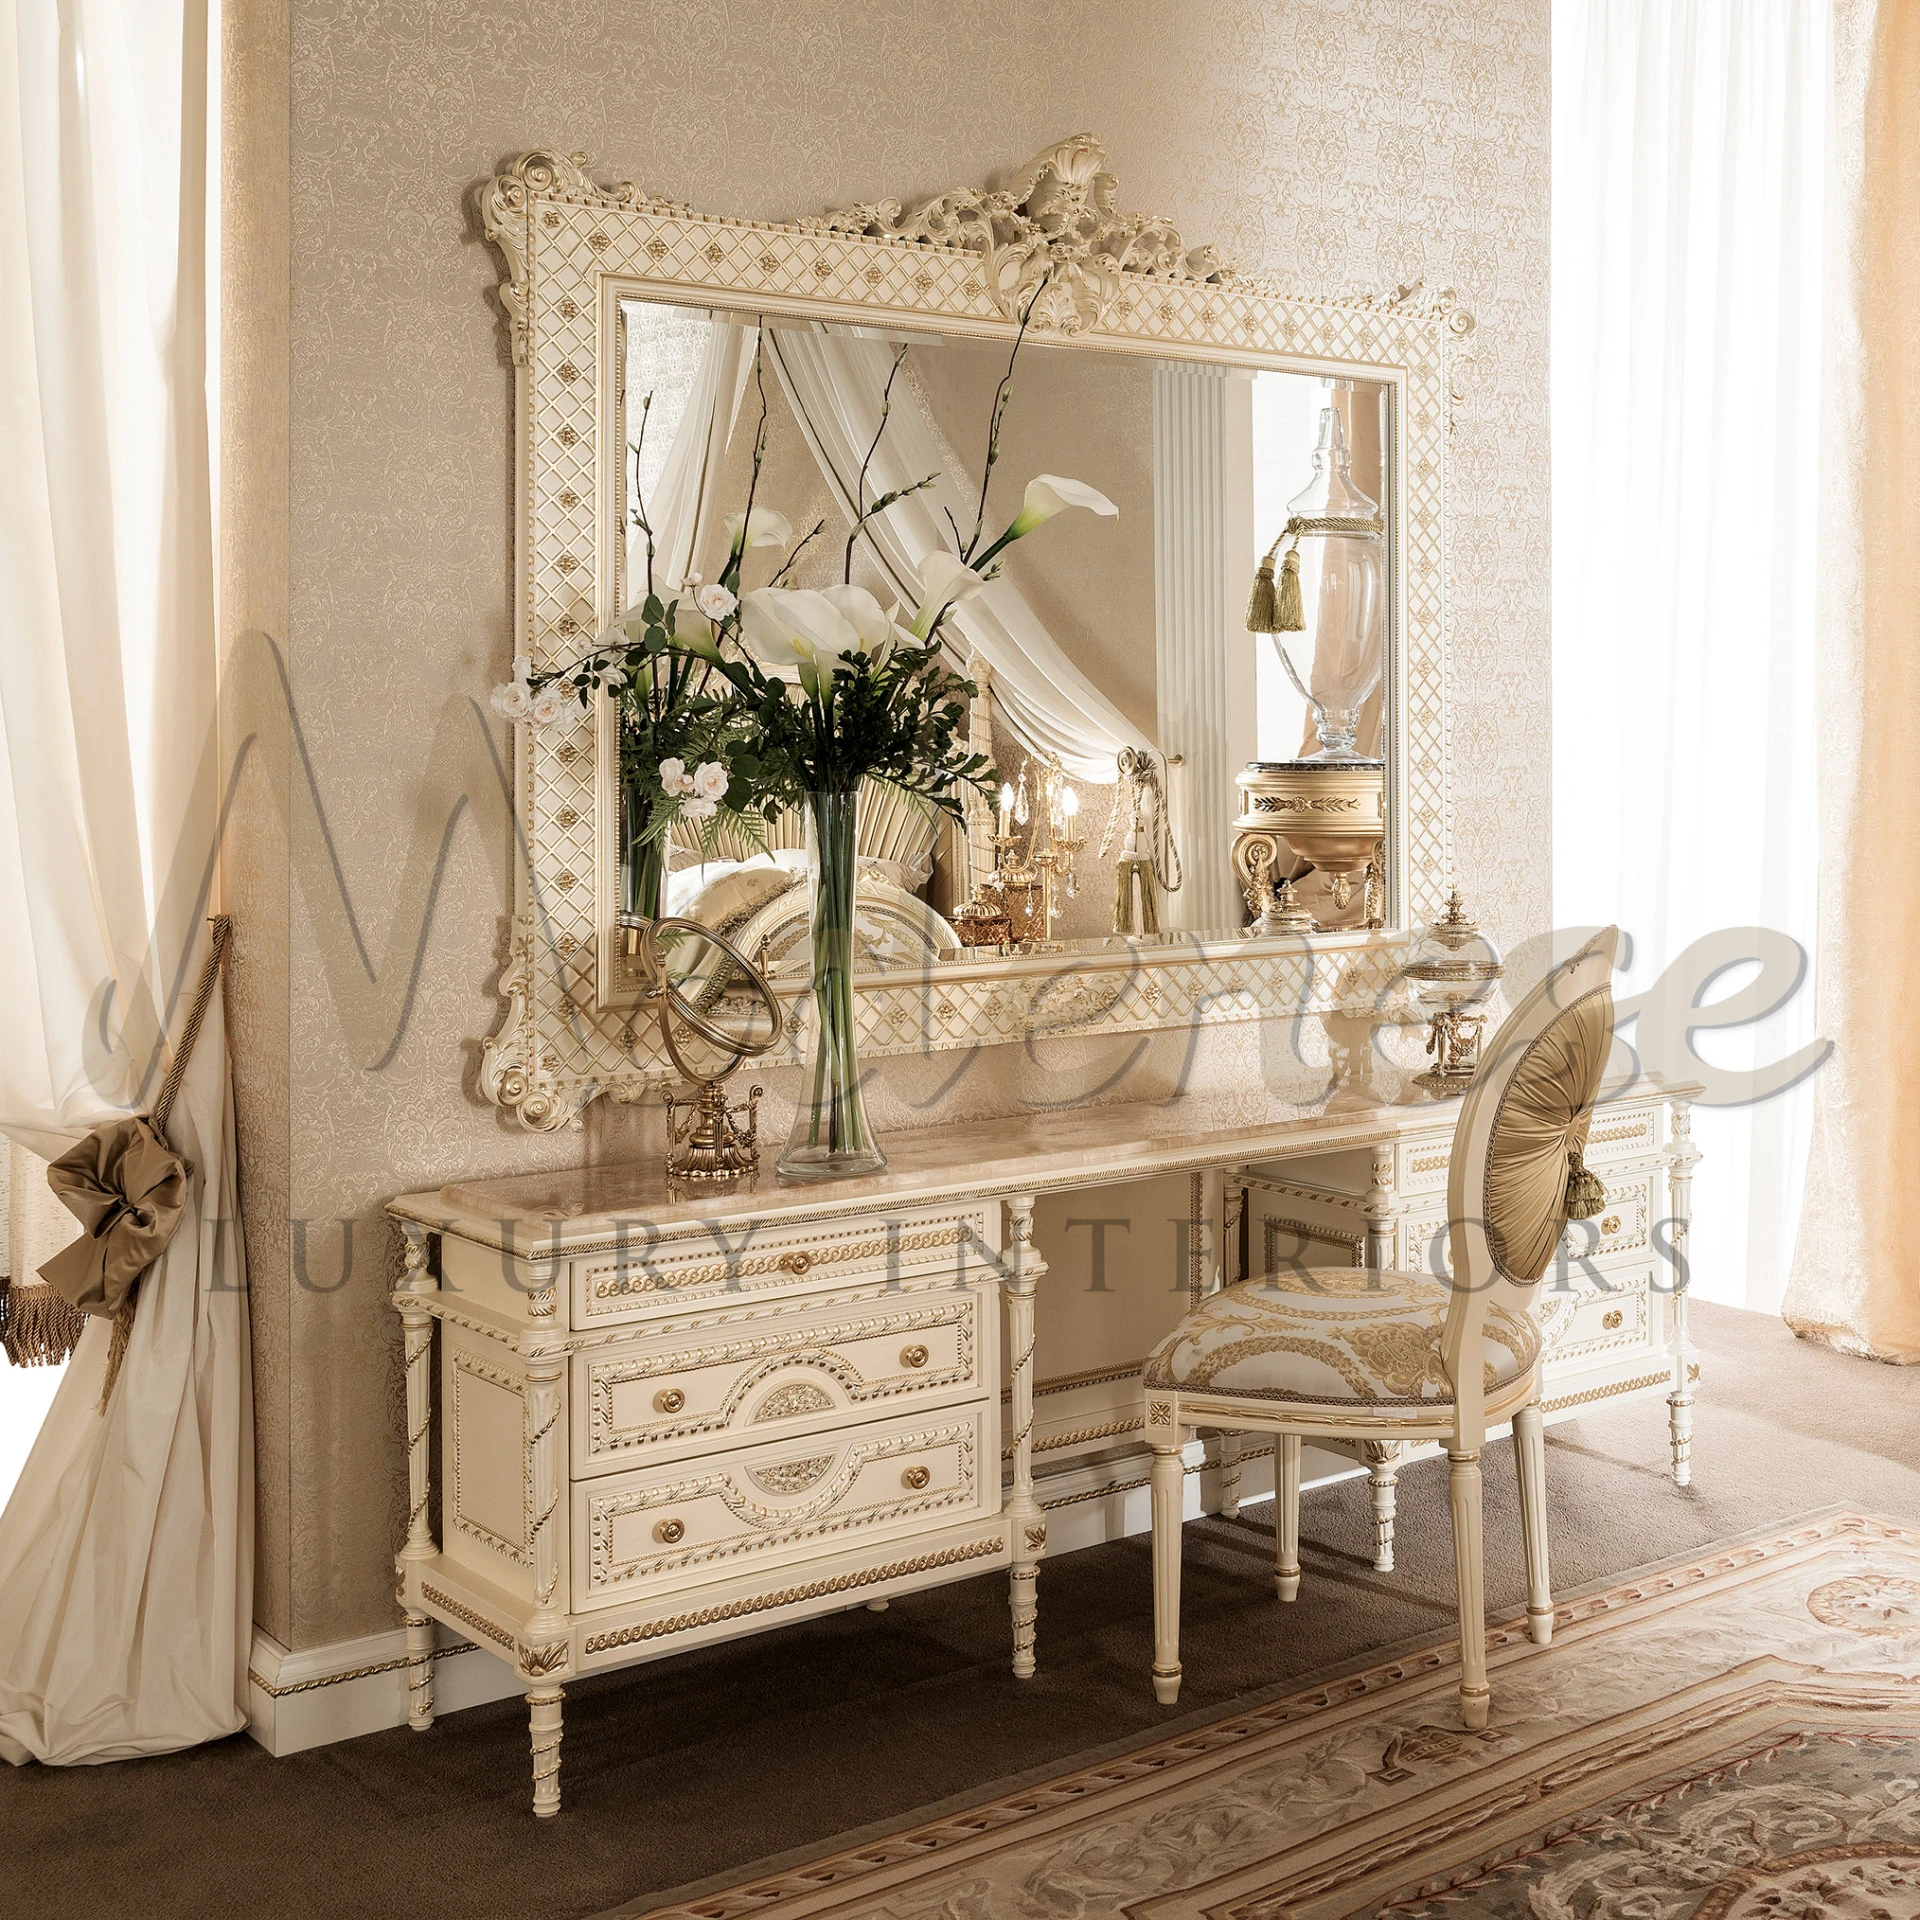 The fine details, including the patterned trim work around each drawer and the side panels, contribute to the table's grand and sophisticated appearance, making it a centerpiece.